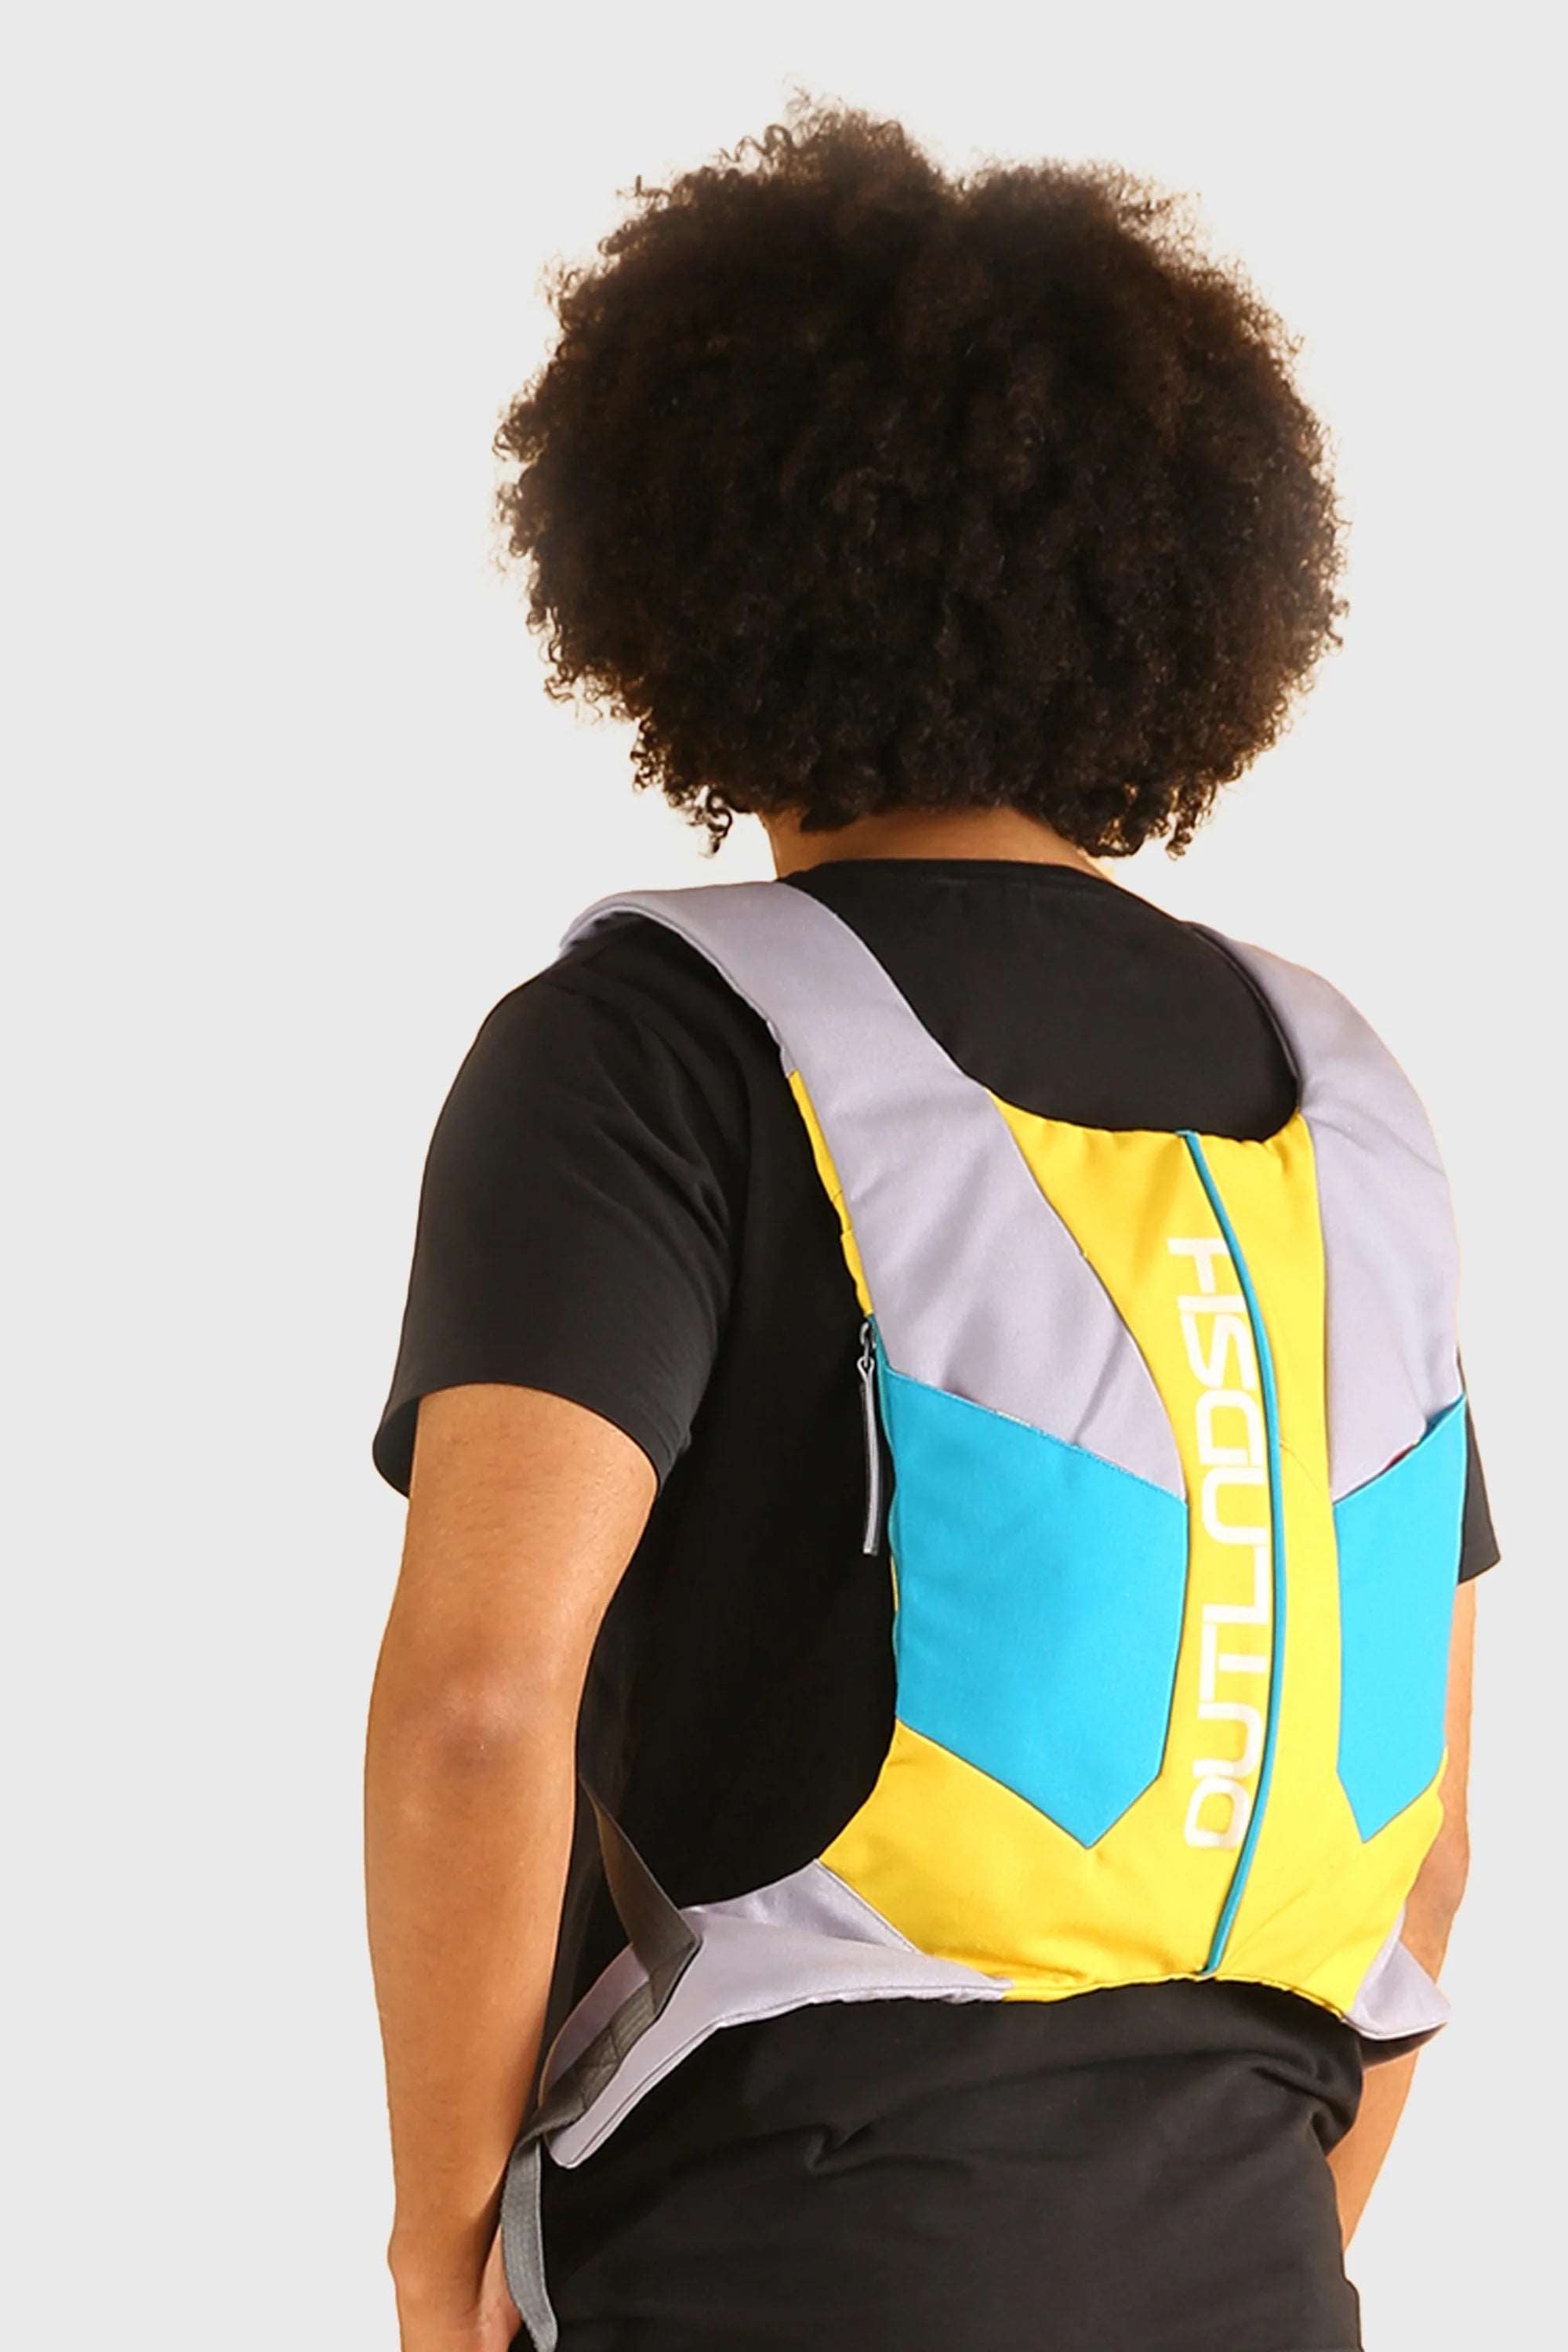 OUTLNDSH Backpack bag yellow color for urban rider 